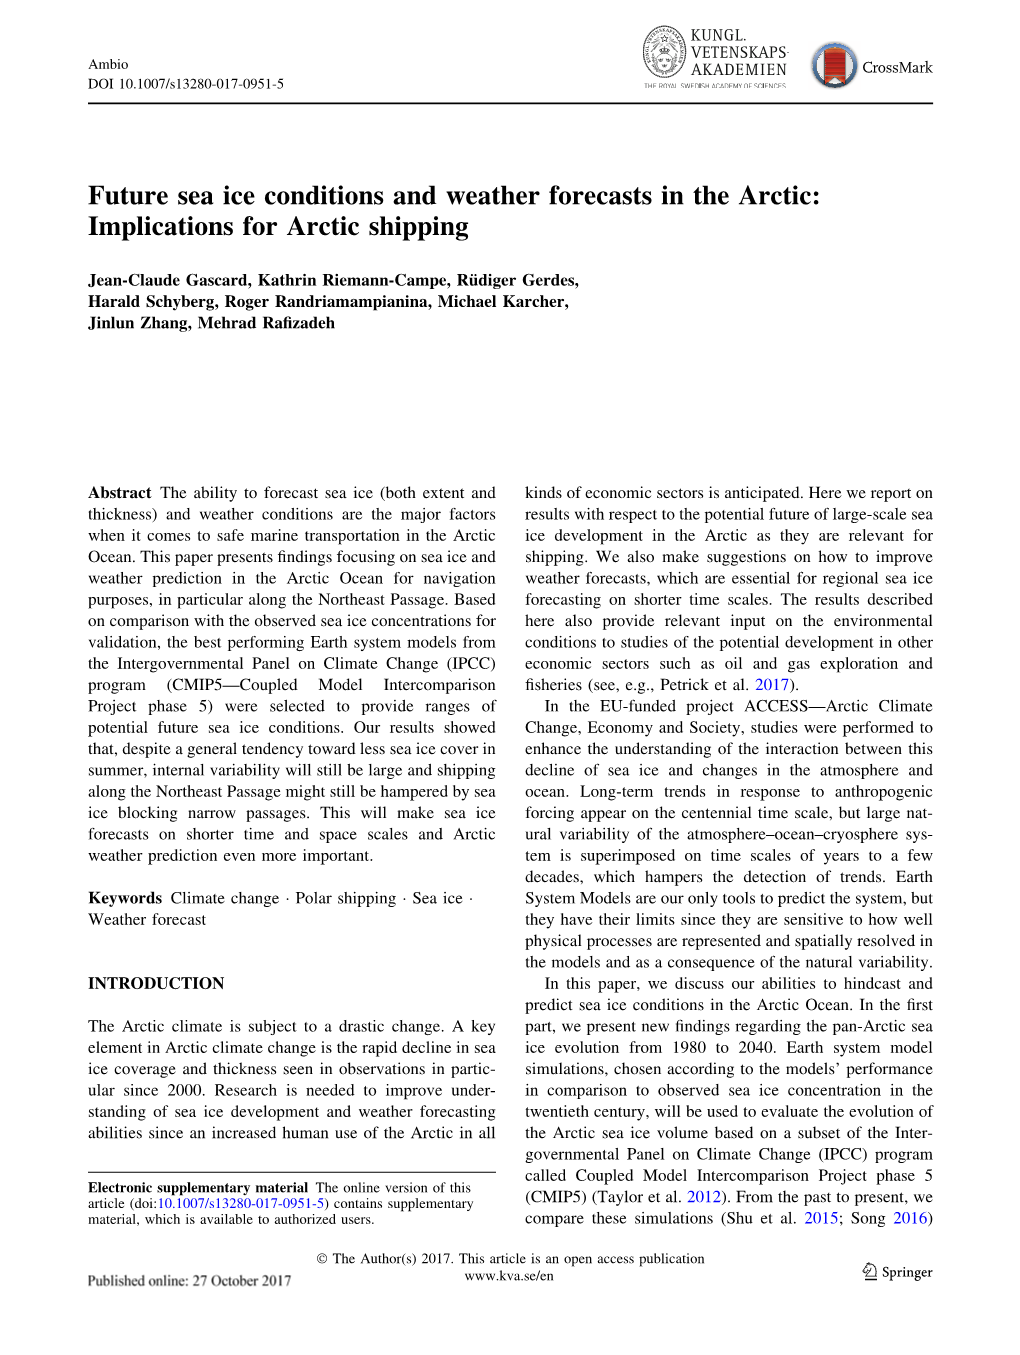 Future Sea Ice Conditions and Weather Forecasts in the Arctic: Implications for Arctic Shipping